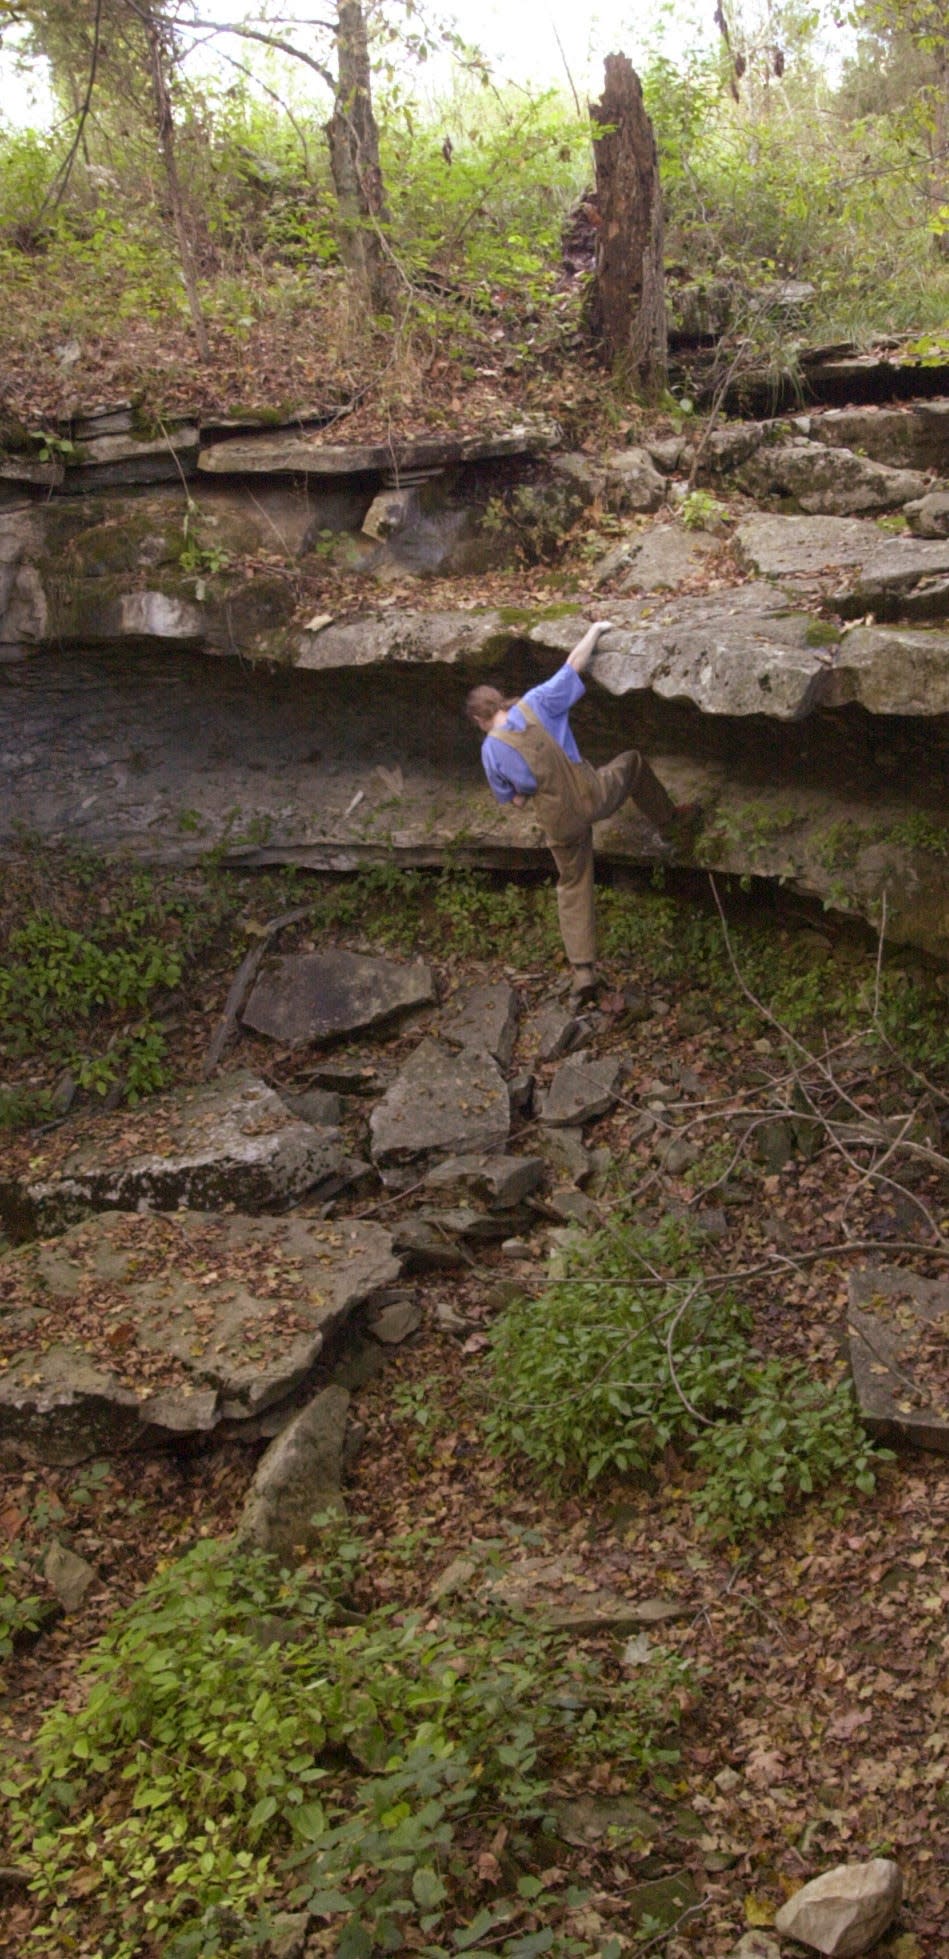 Molly Wright of Williams climbs down the edge of a stone cliff at the Wesley Chapel Gulf, a unique area of the Lost River system that includes cave openings and a pool of the underground river's water that rises to the surface. Wright and others visited the site during a Lost River Conservation Association field trip.